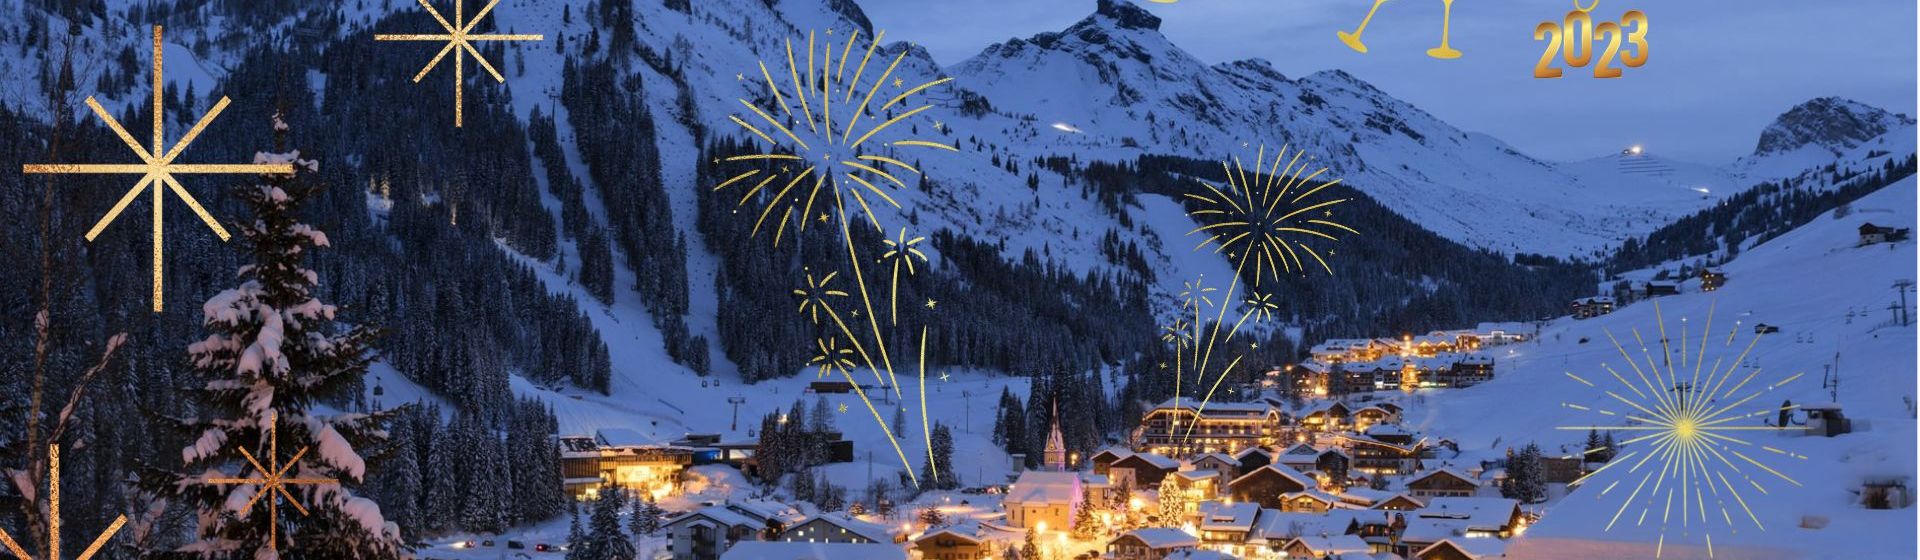 NEW YEAR IN ARABBA: AN EXPERIENCE TO LIVE ON THE DOLOMITES